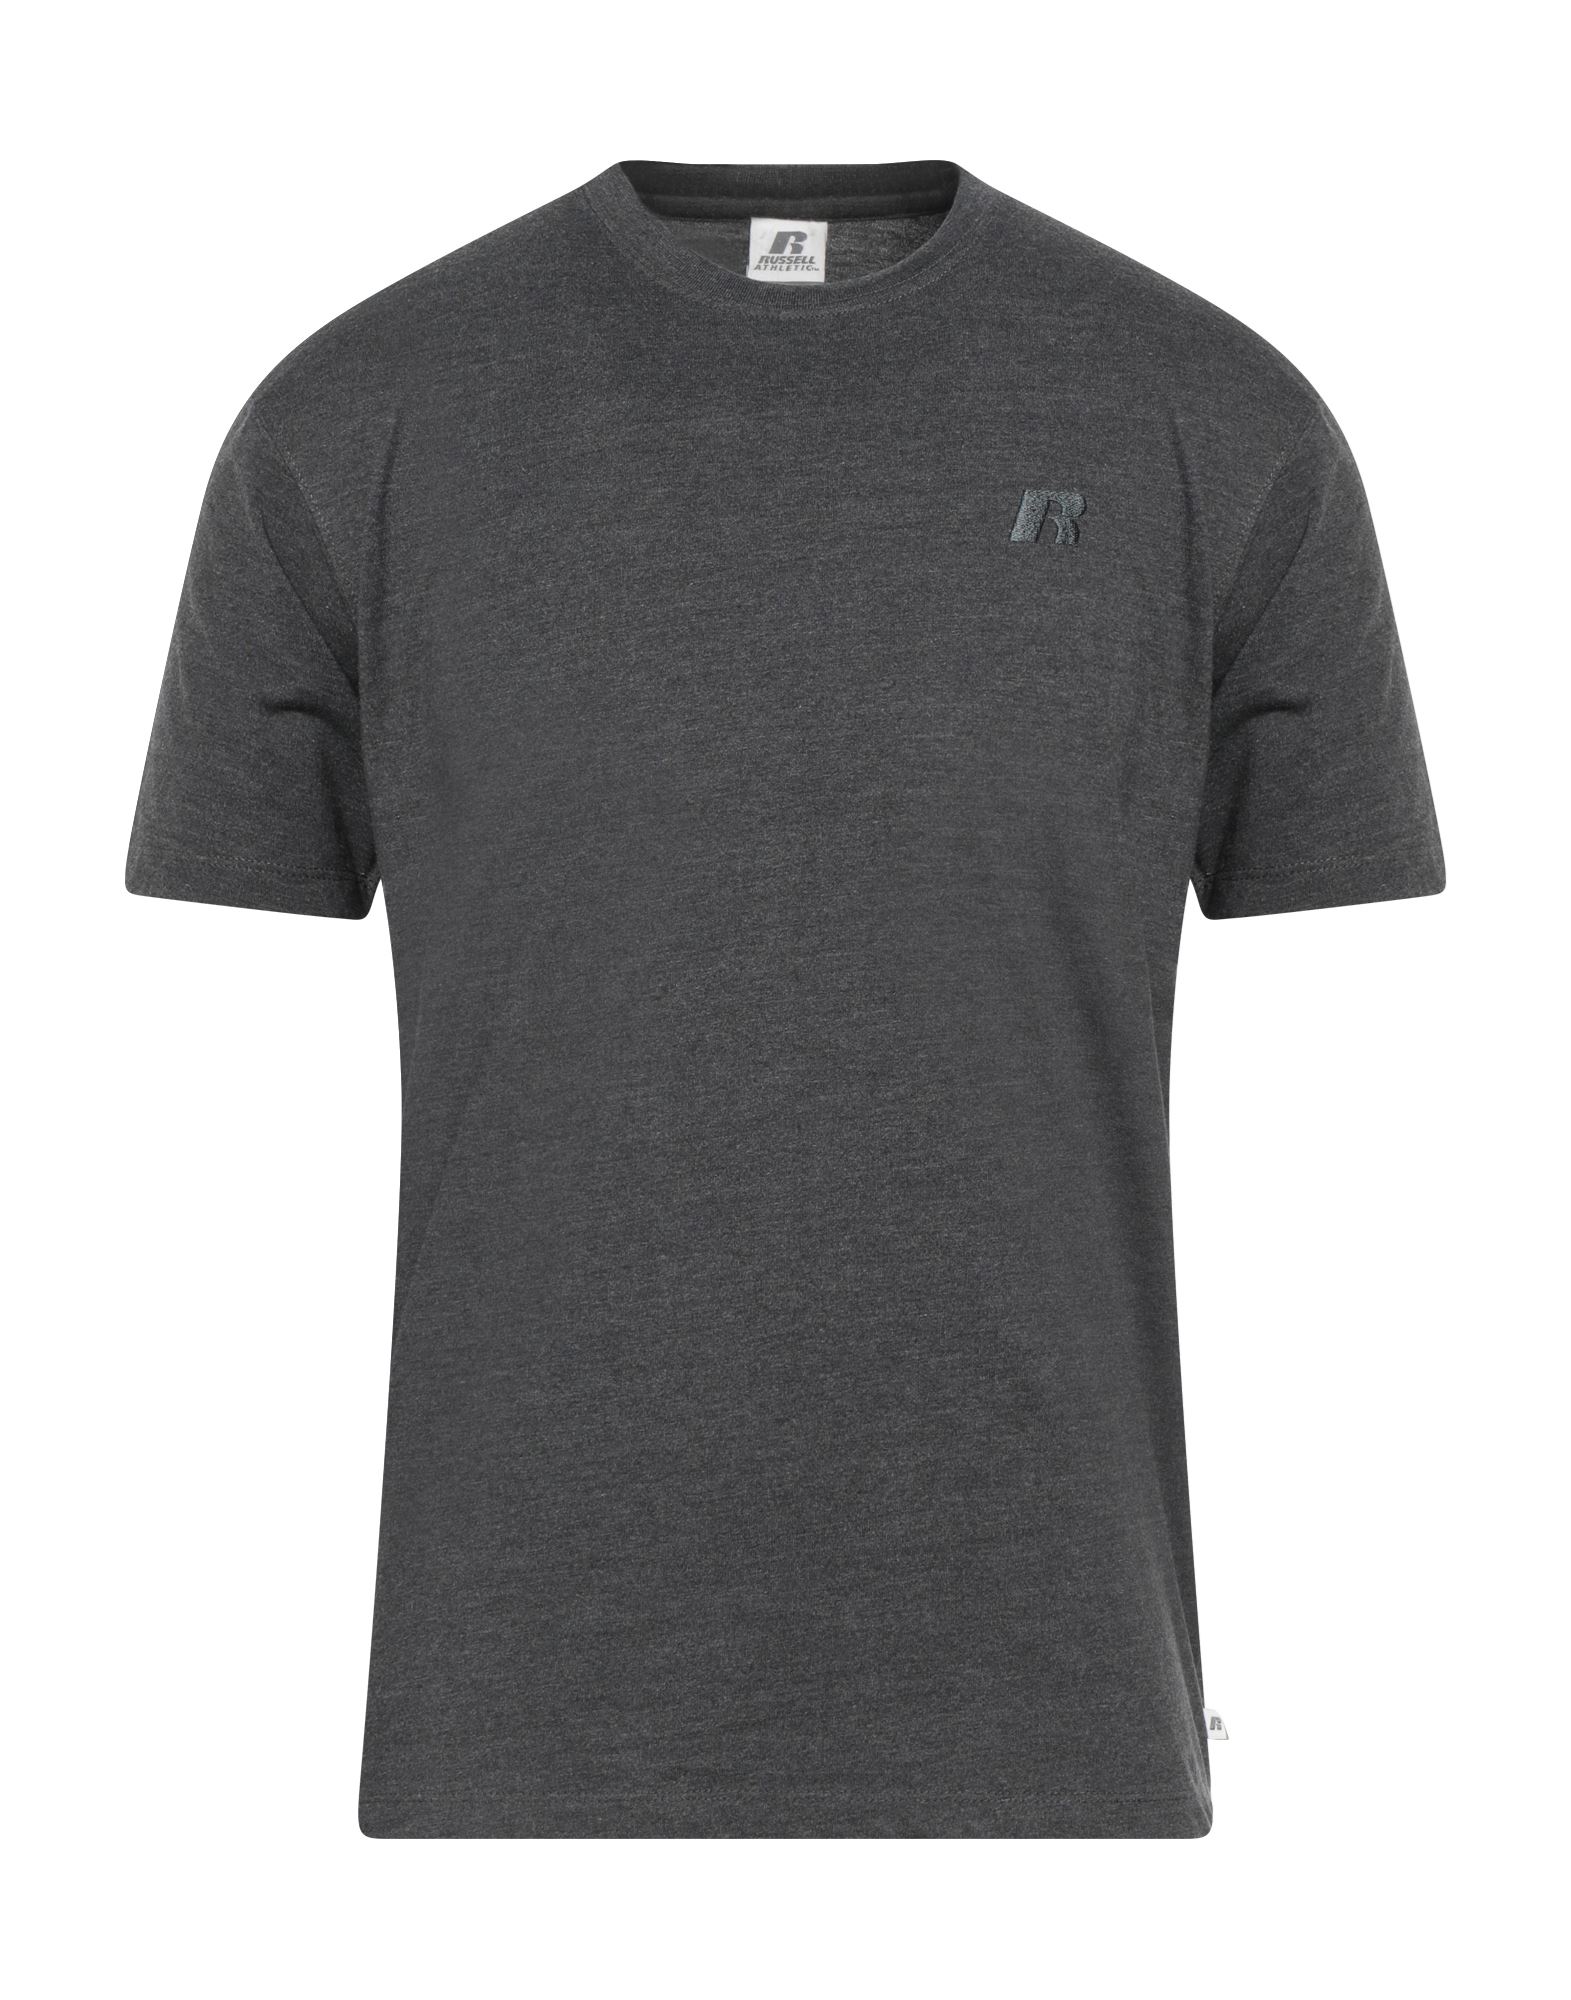 RUSSELL ATHLETIC RUSSELL ATHLETIC MAN T-SHIRT STEEL GREY SIZE XXL COTTON, POLYESTER